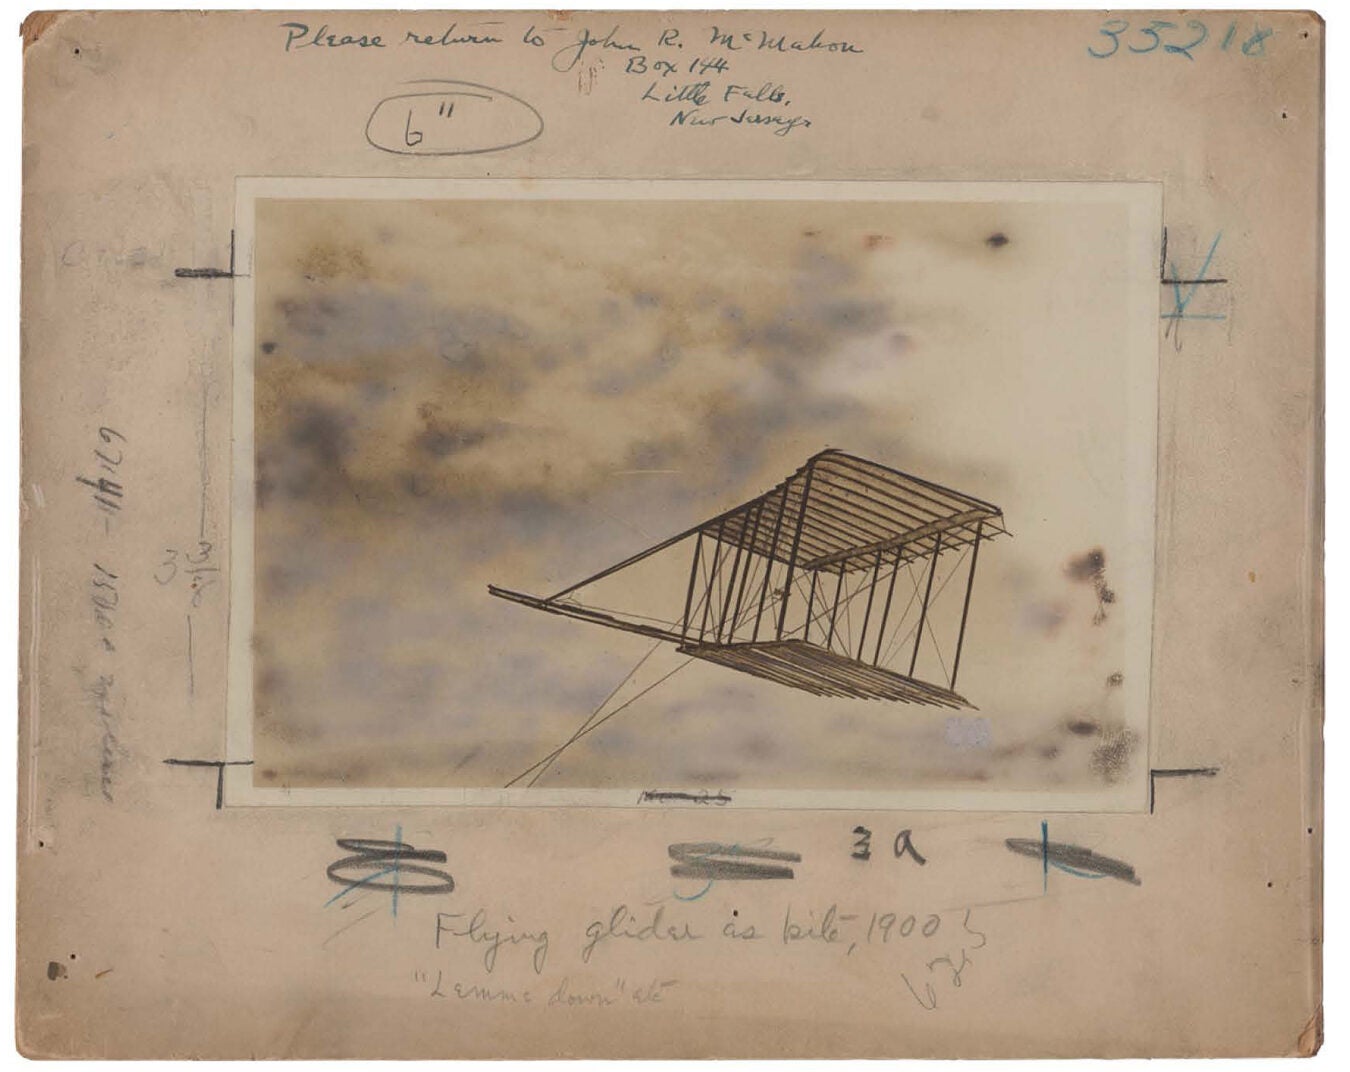 Photo of one of the Wright Brothers' first gliders.